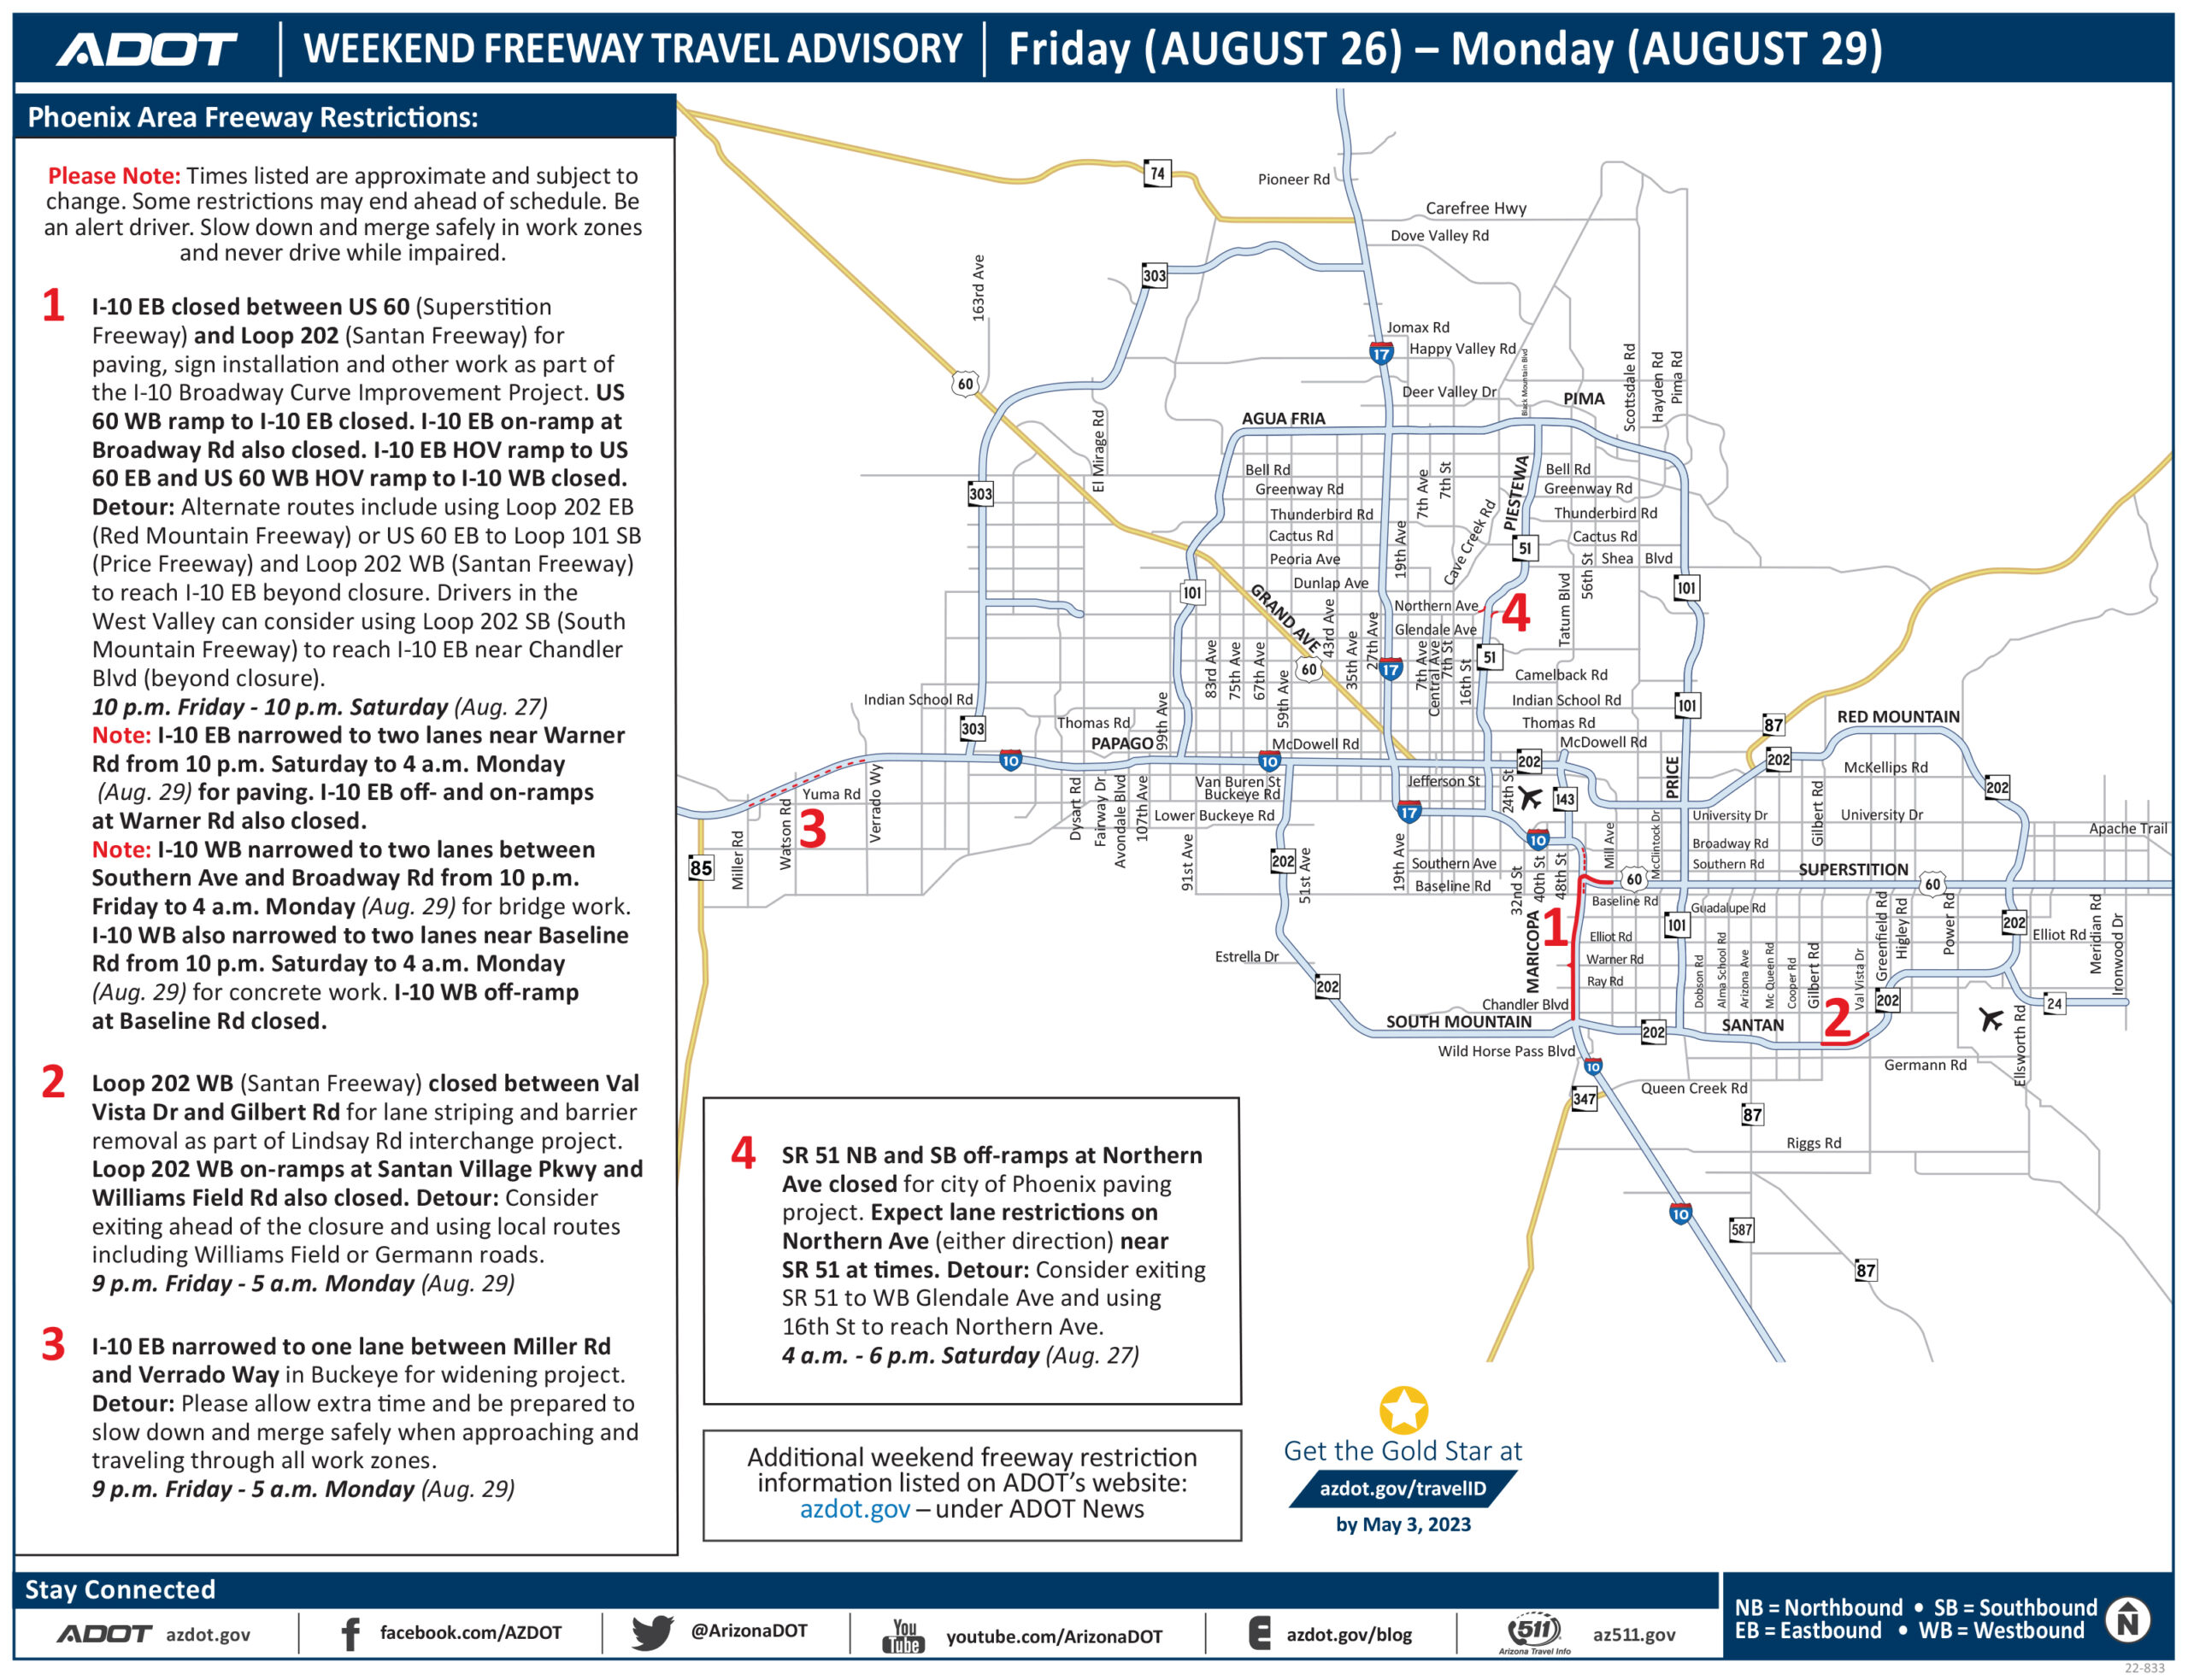 Phoenix-area freeway restrictions this weekend, Aug. 26–29